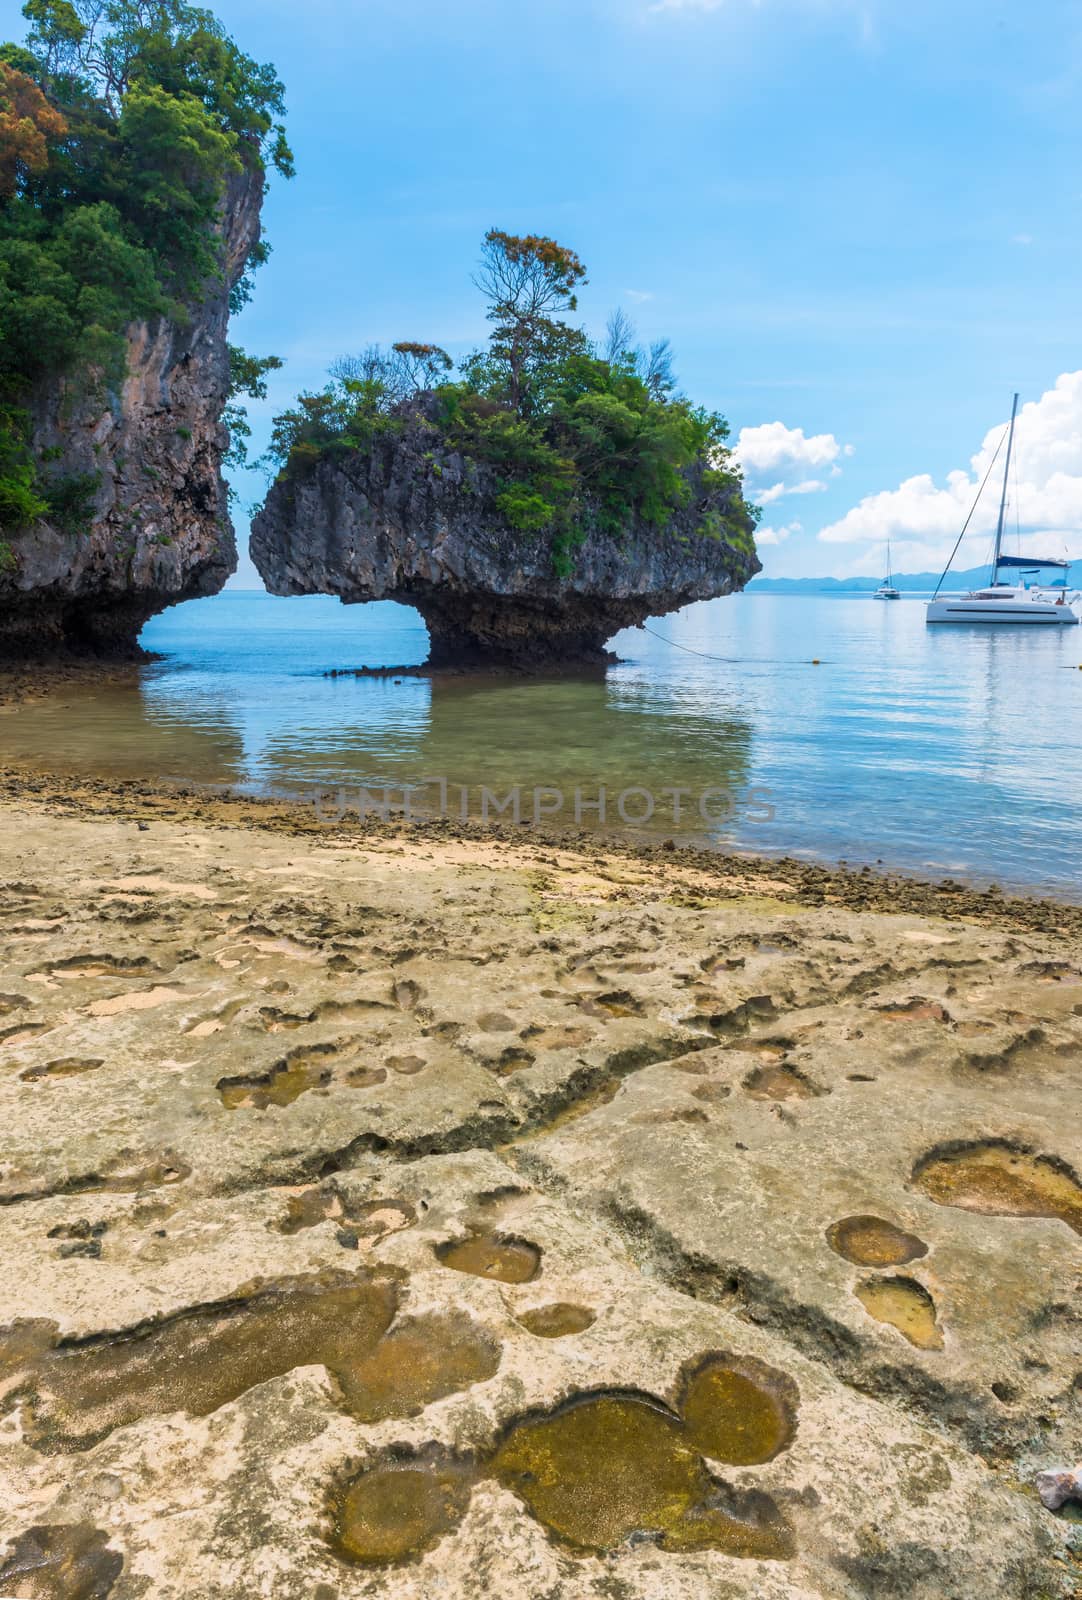 vertical photograph - rocky coast of the island in the Andaman Sea, Thailand